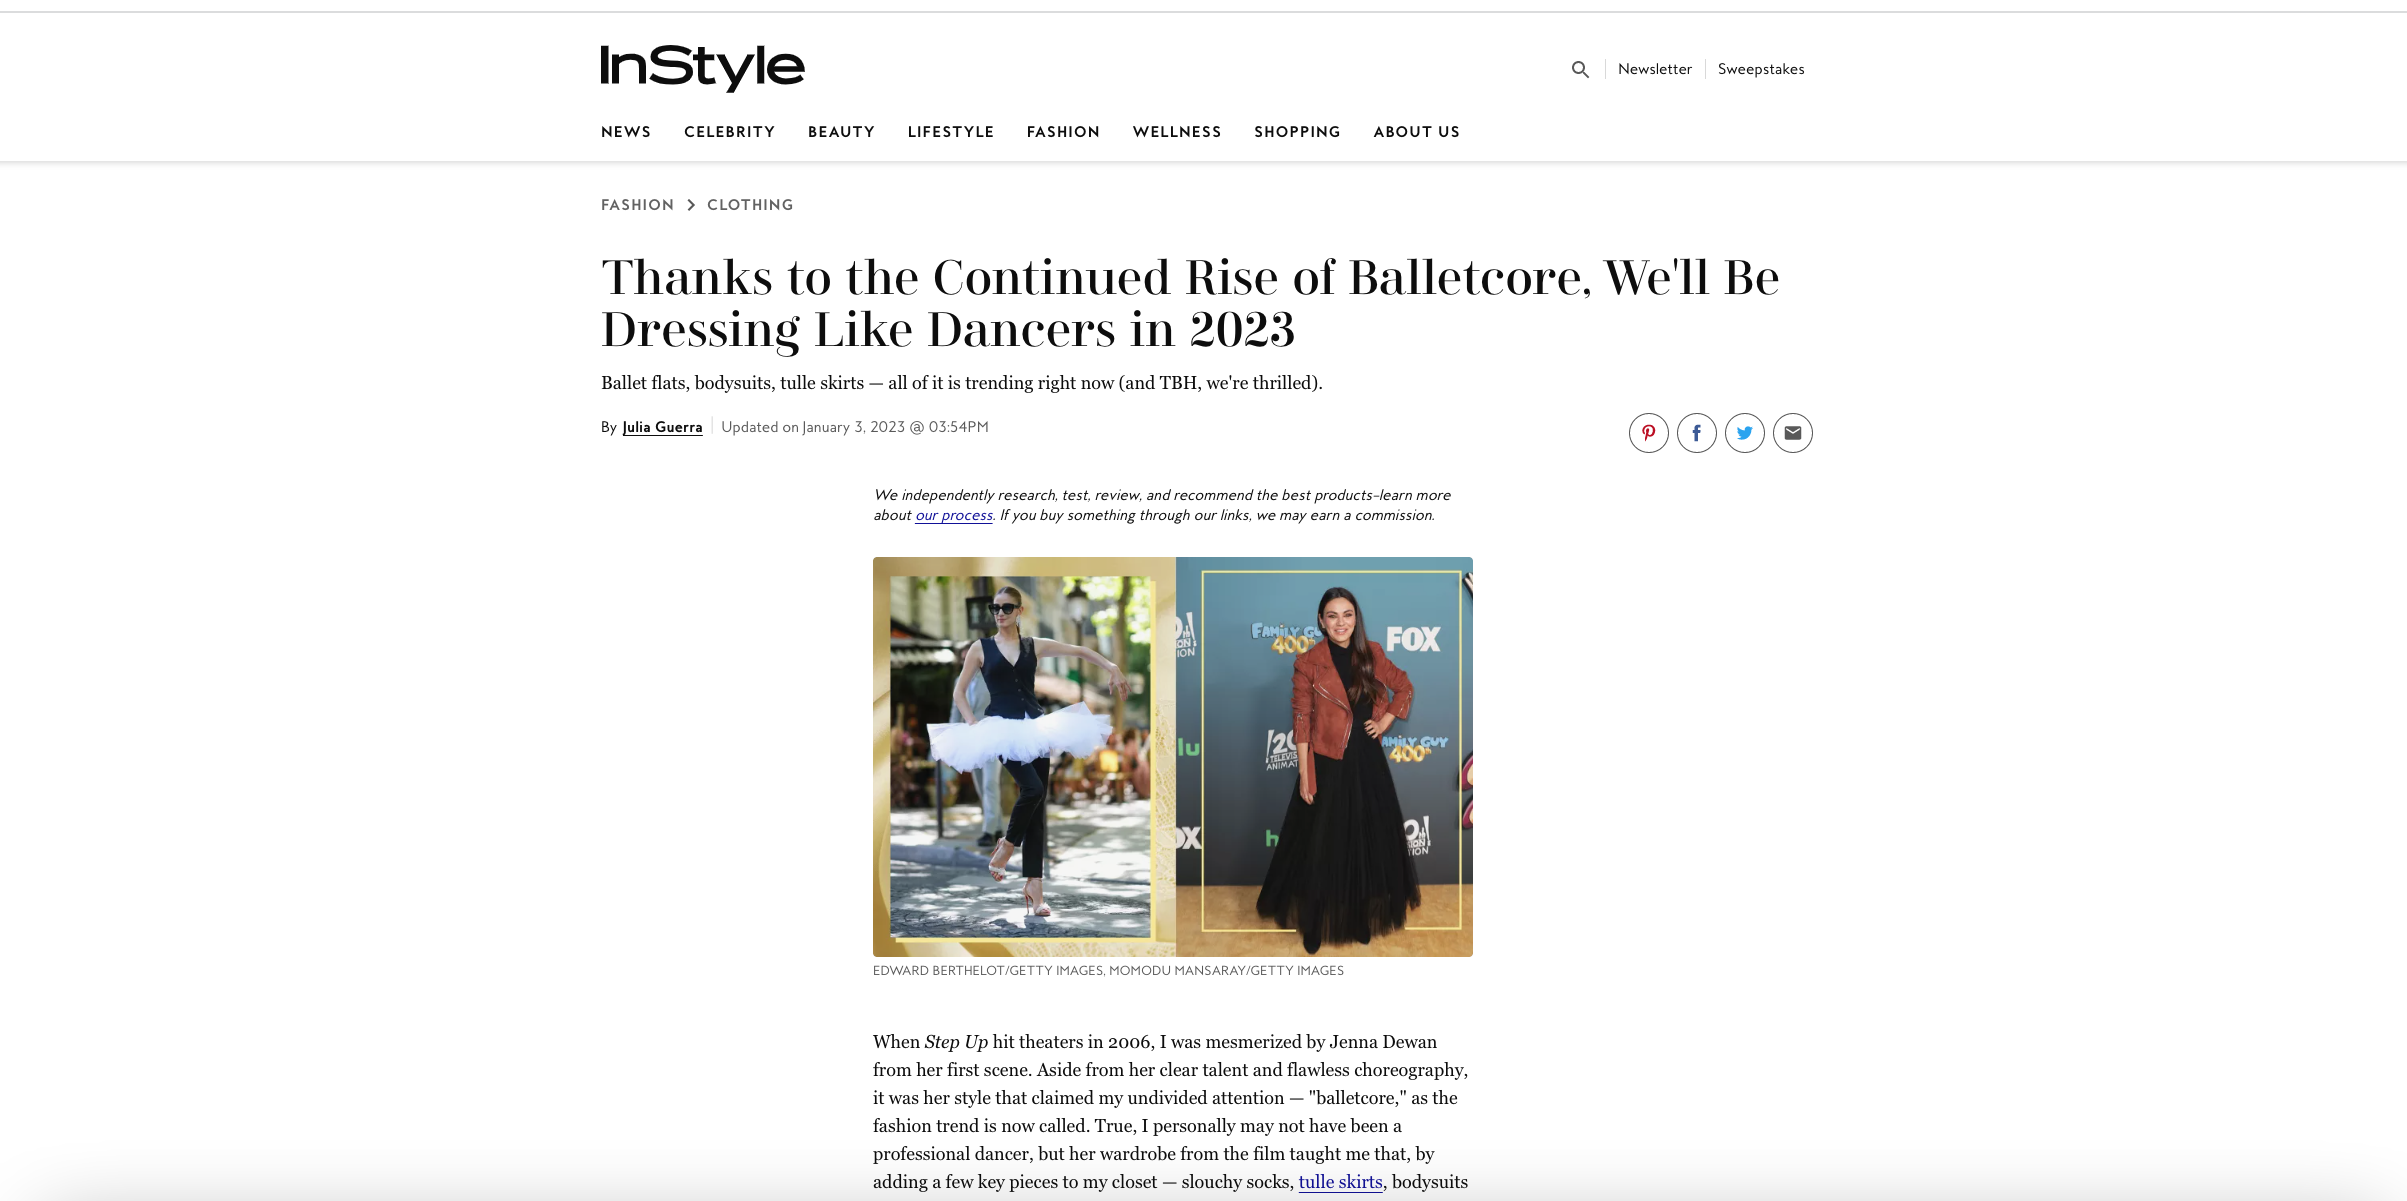 InStyle: Thanks to the Continued Rise of Balletcore, We'll Be Dressing Like Dancers in 2023